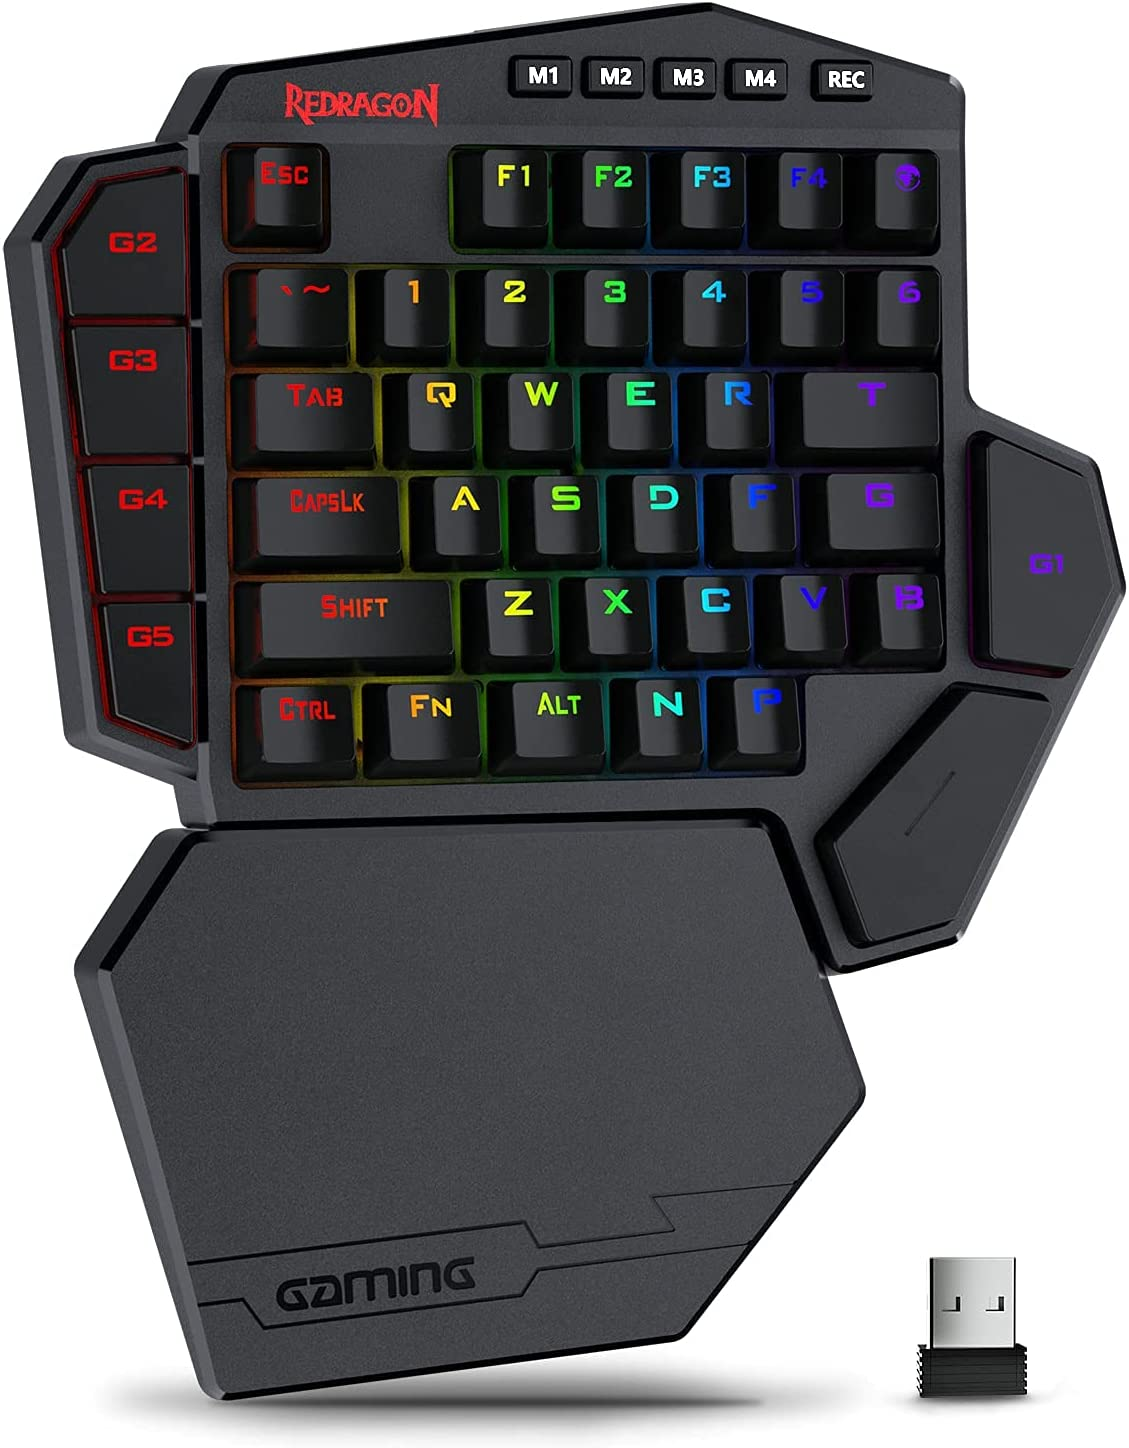 Although a gaming keypad has fewer keys vs. a keyboard, the keys can be programmed for optimal gaming.